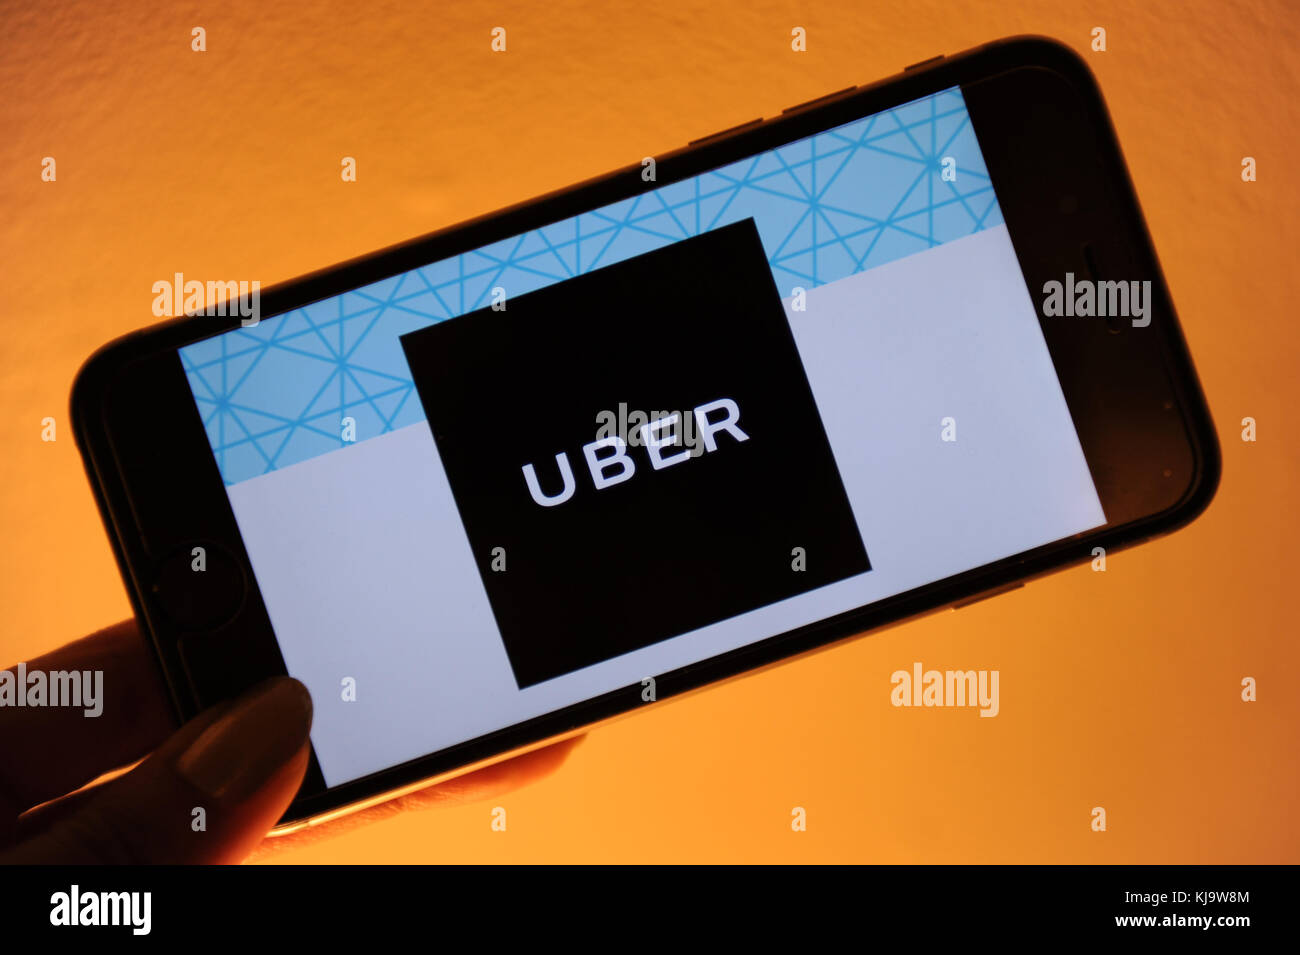 The Uber logo seen on a phone Stock Photo